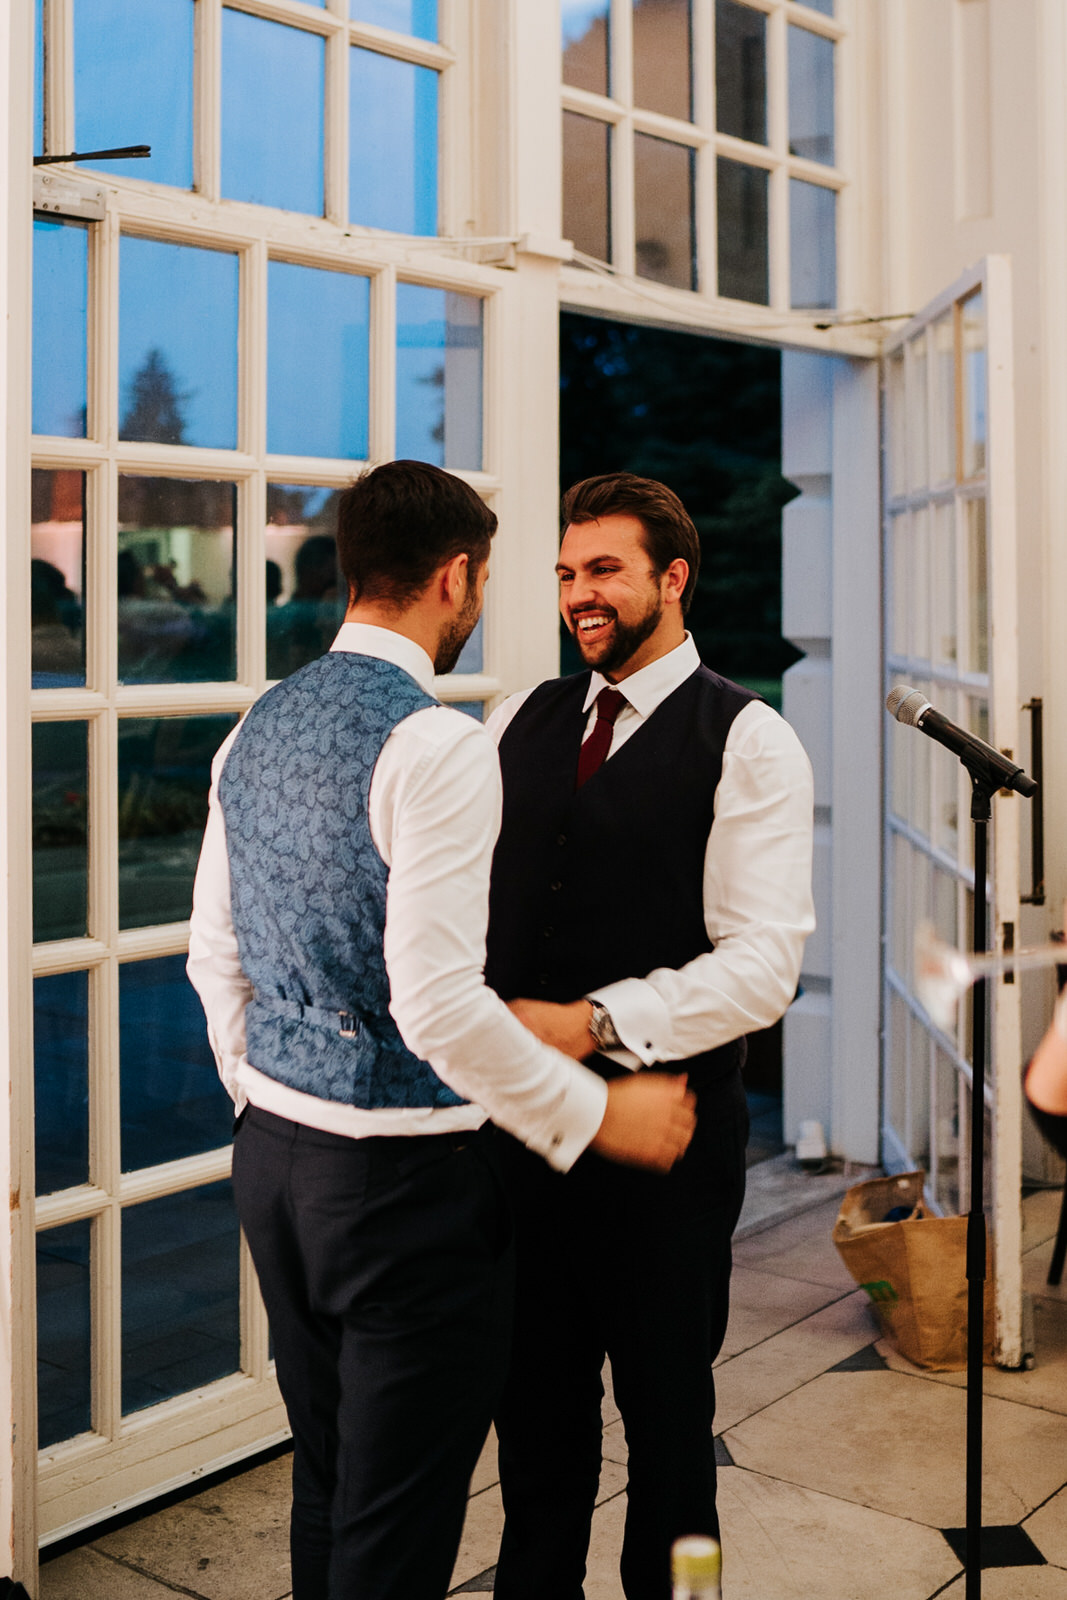  Best man and groom look at each other and smile as best man finishes speech 